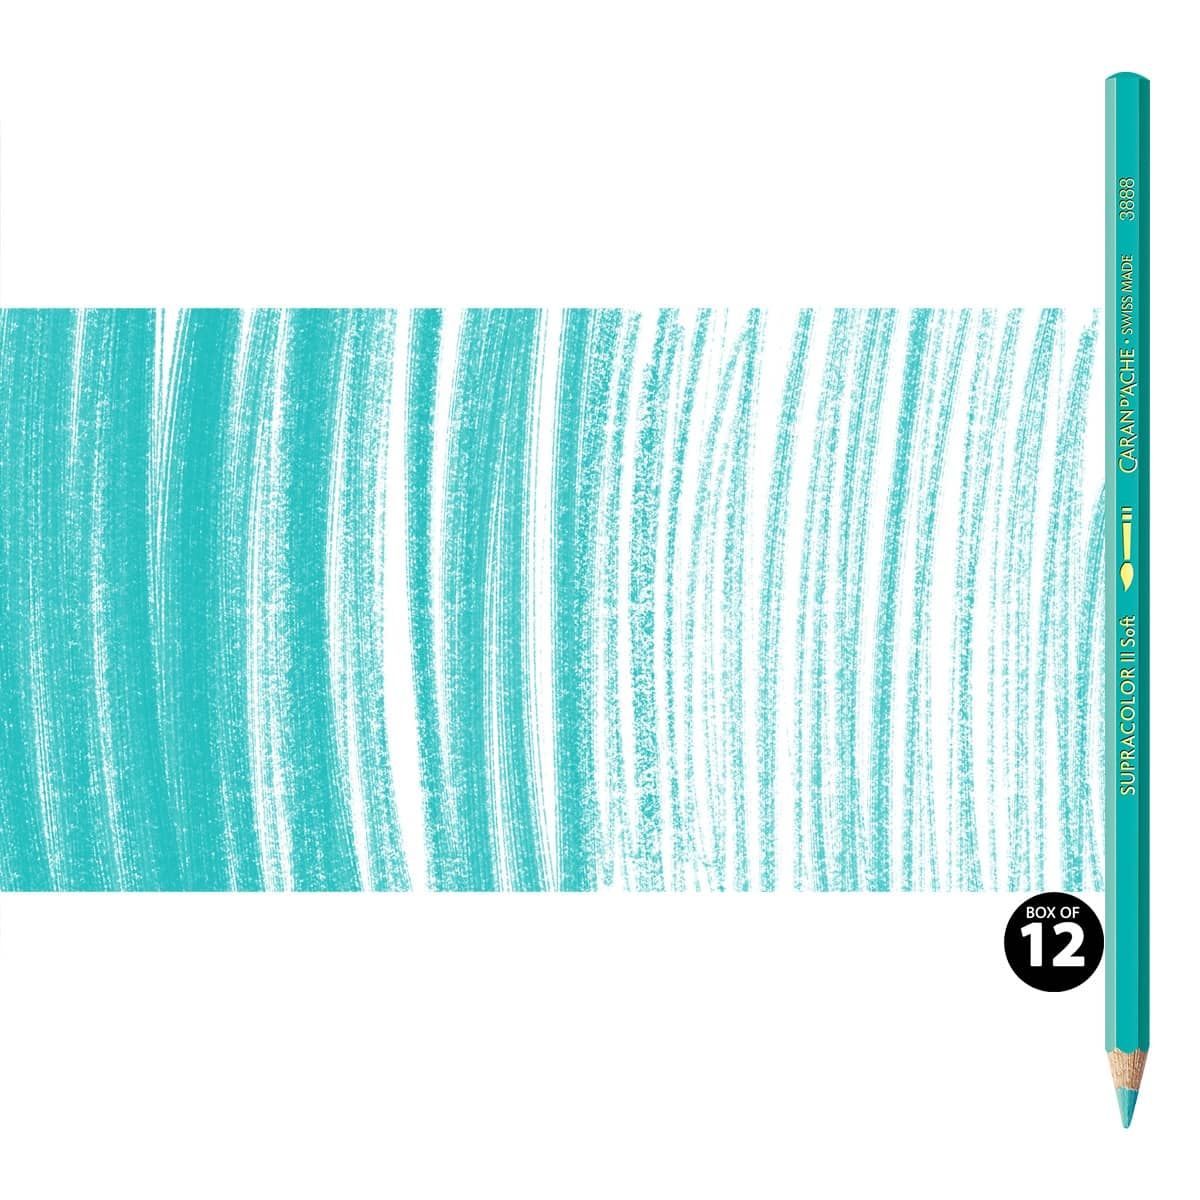 Supracolor II Watercolor Pencils Box of 12 No. 191 - Turquoise Green